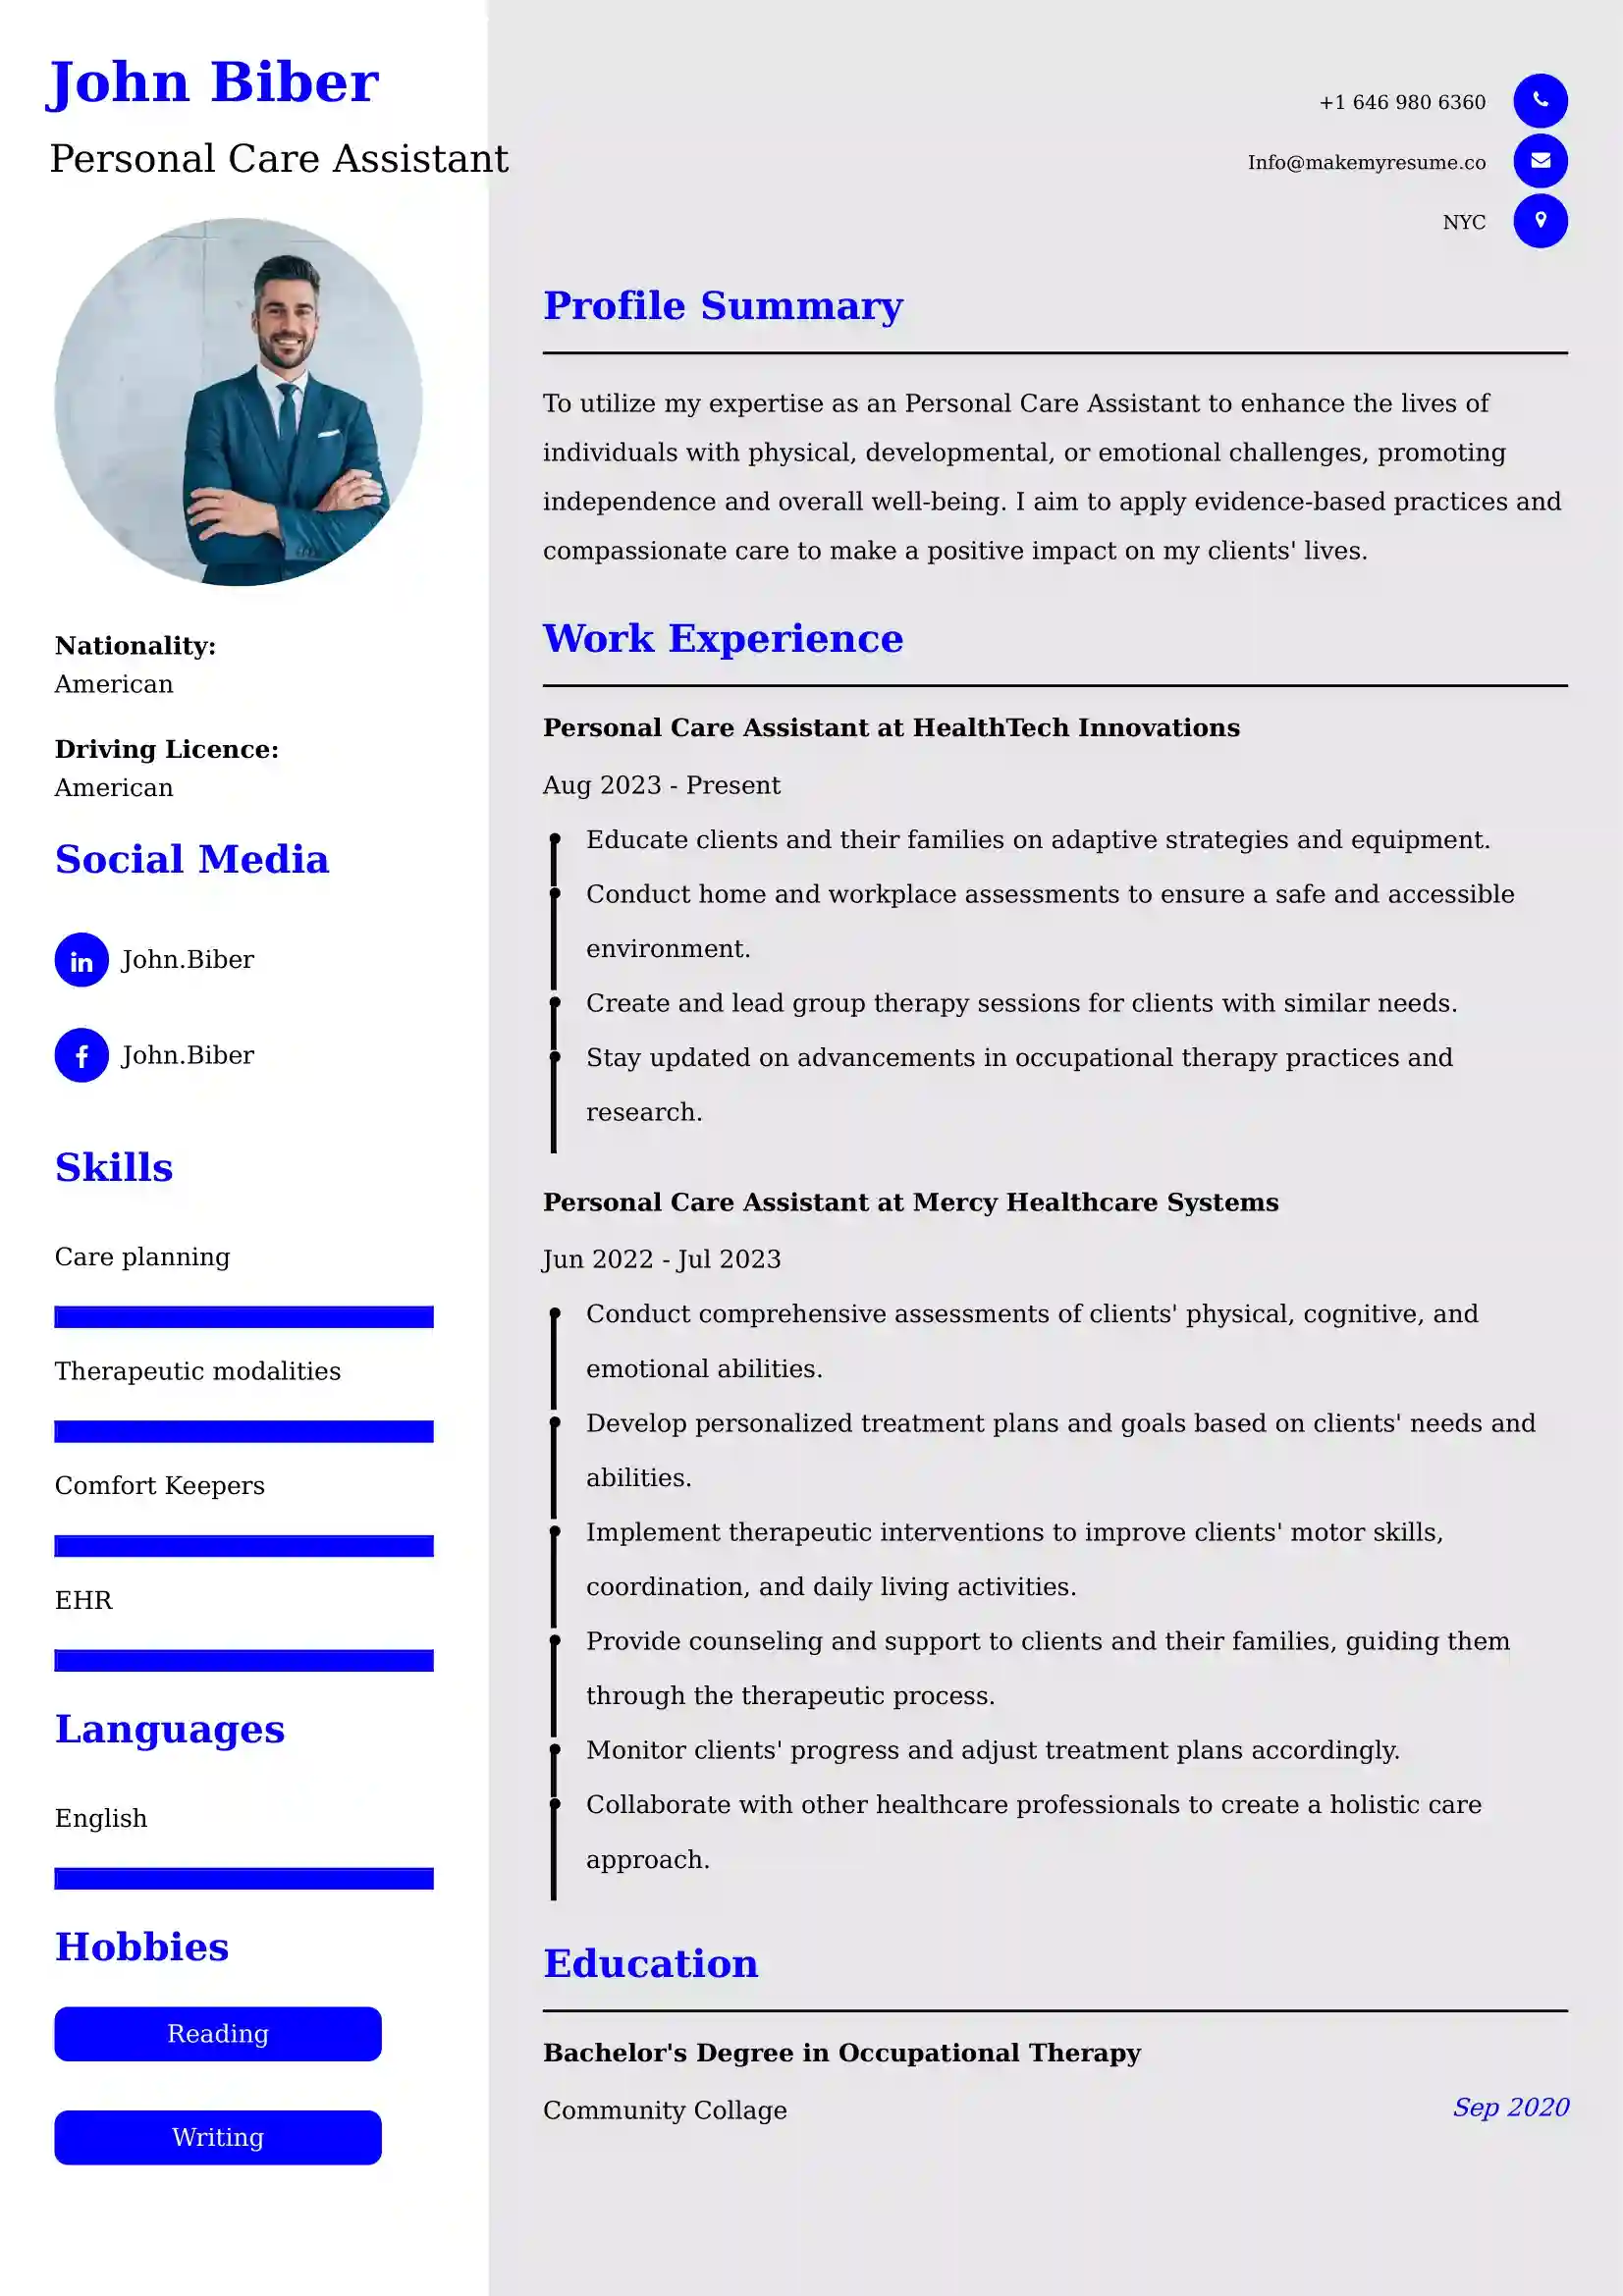 Personal Care Assistant Resume Examples for UK Jobs - Tips and Guide